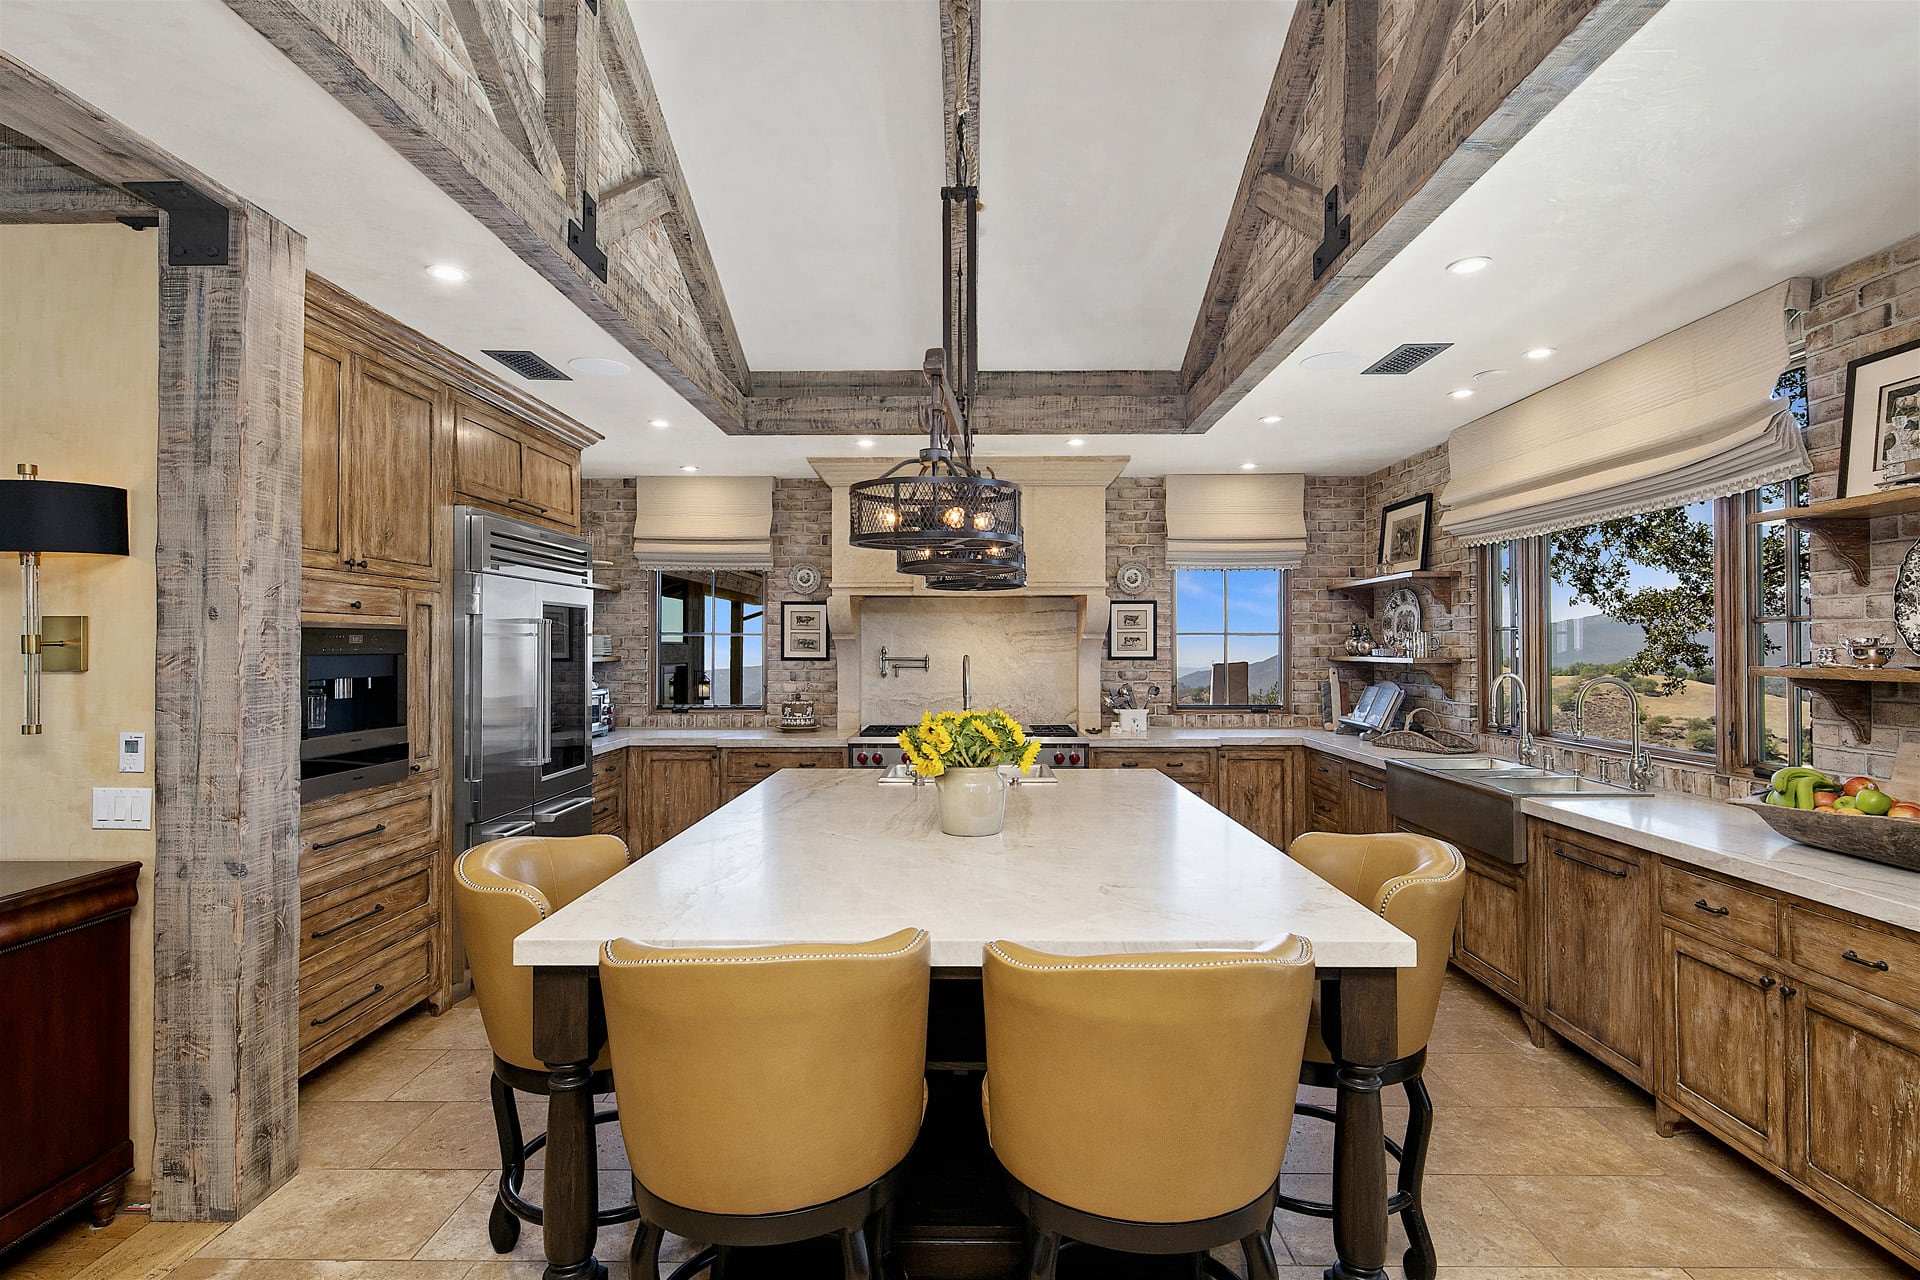 Chef's kitchen with barstools around an island countertop